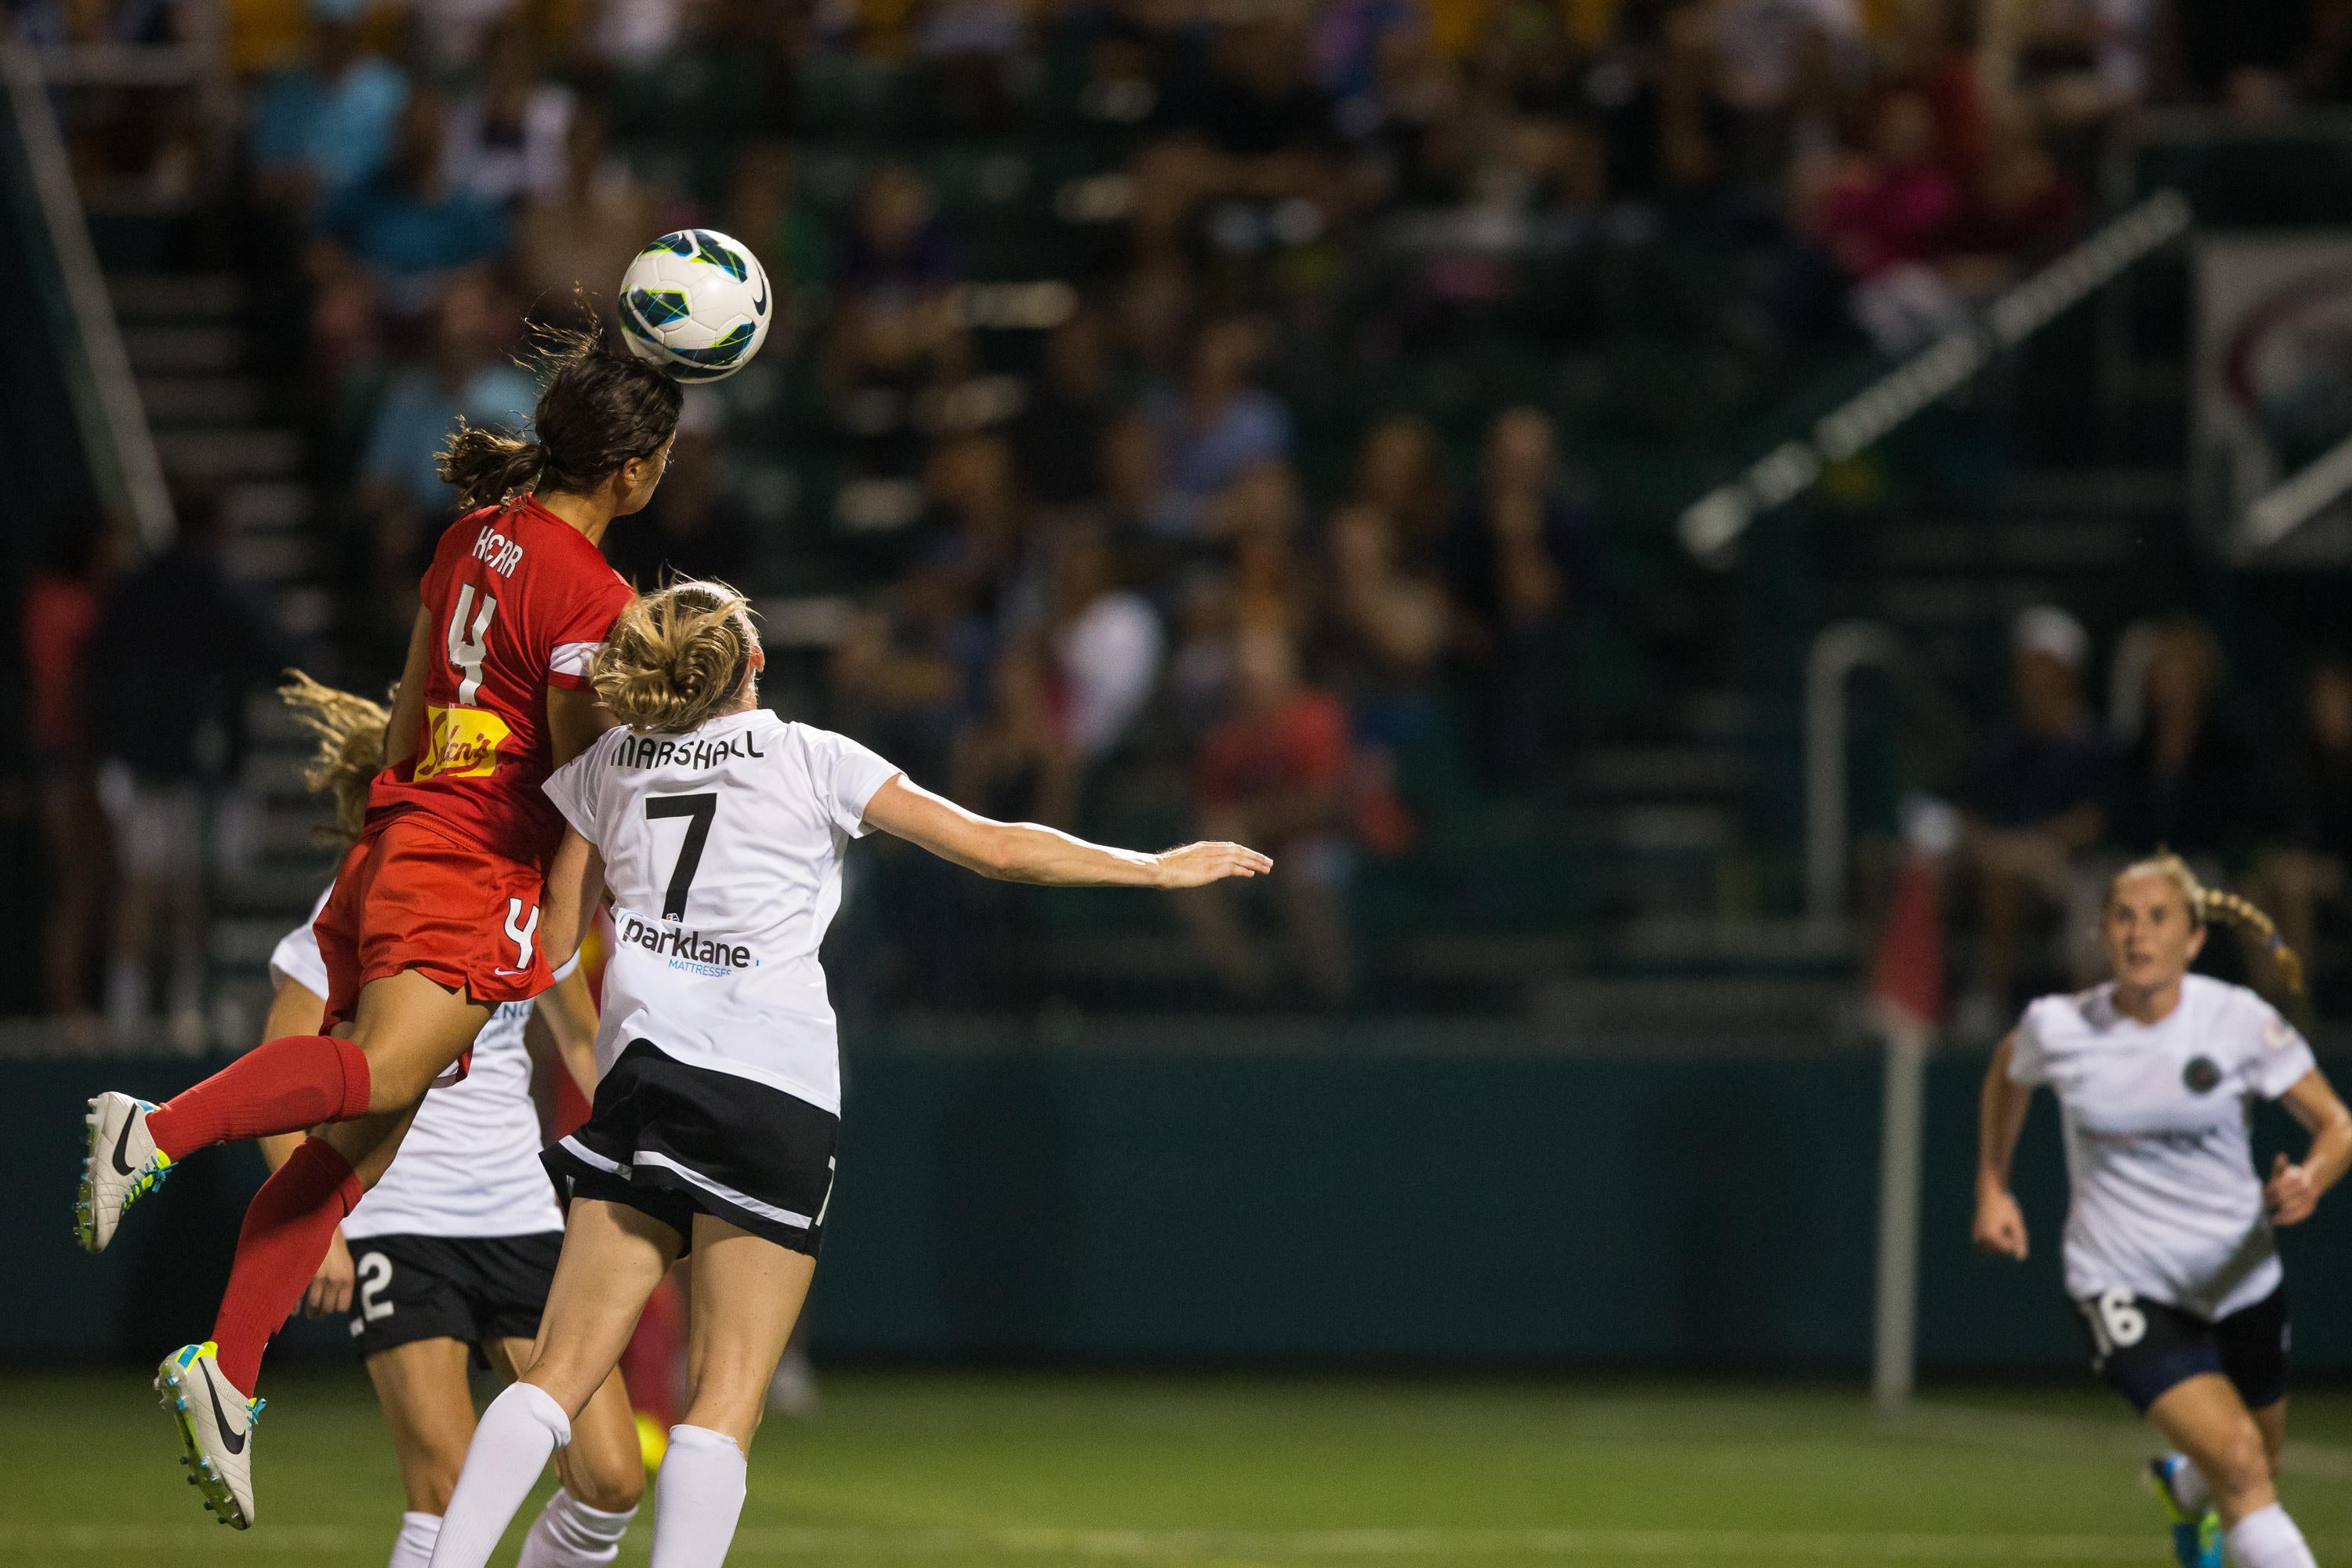 Samantha Kerr #4 of Western New York Flash heads the ball over Portland Thorns FC's Nikki Marshall #7 and Christine Sinclair #12 in the National Women's Soccer League Championship at Sahlen's Stadium August 31, 2013 in Rochester, New York.